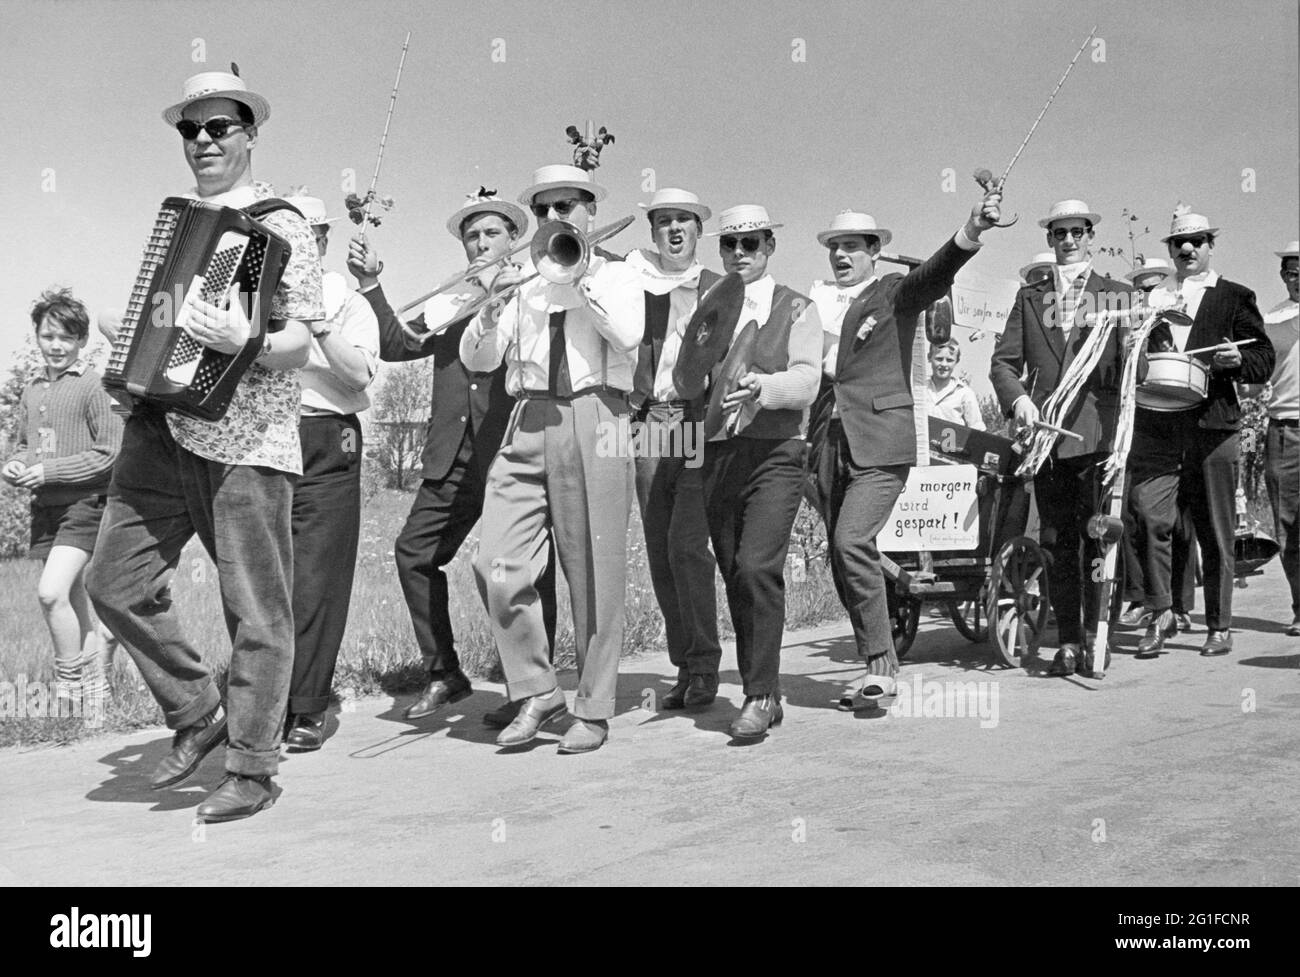 festivities, Father's Day, men on the way, group of men, making music and party, Germany, 1960s, ADDITIONAL-RIGHTS-CLEARANCE-INFO-NOT-AVAILABLE Stock Photo